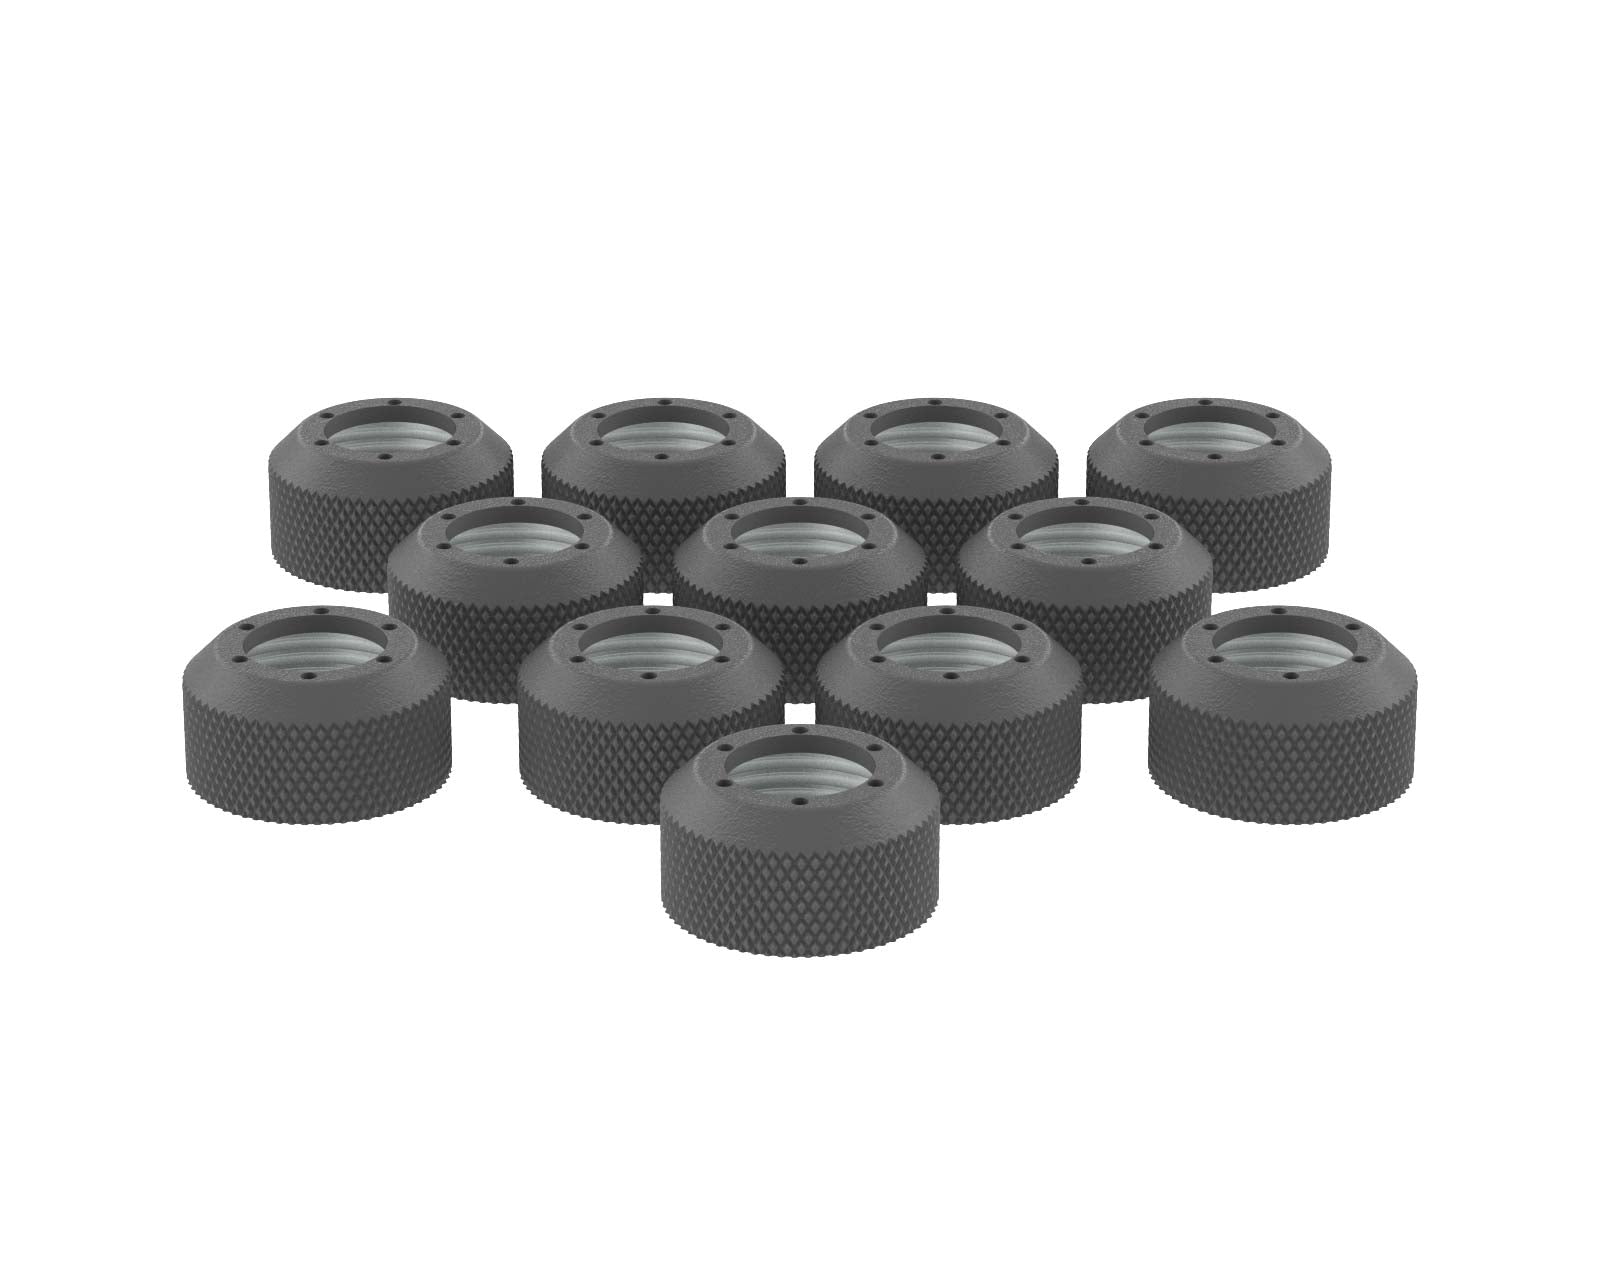 PrimoChill RSX Replacement Cap Switch Over Kit - 1/2in. - PrimoChill - KEEPING IT COOL TX Matte Gun Metal